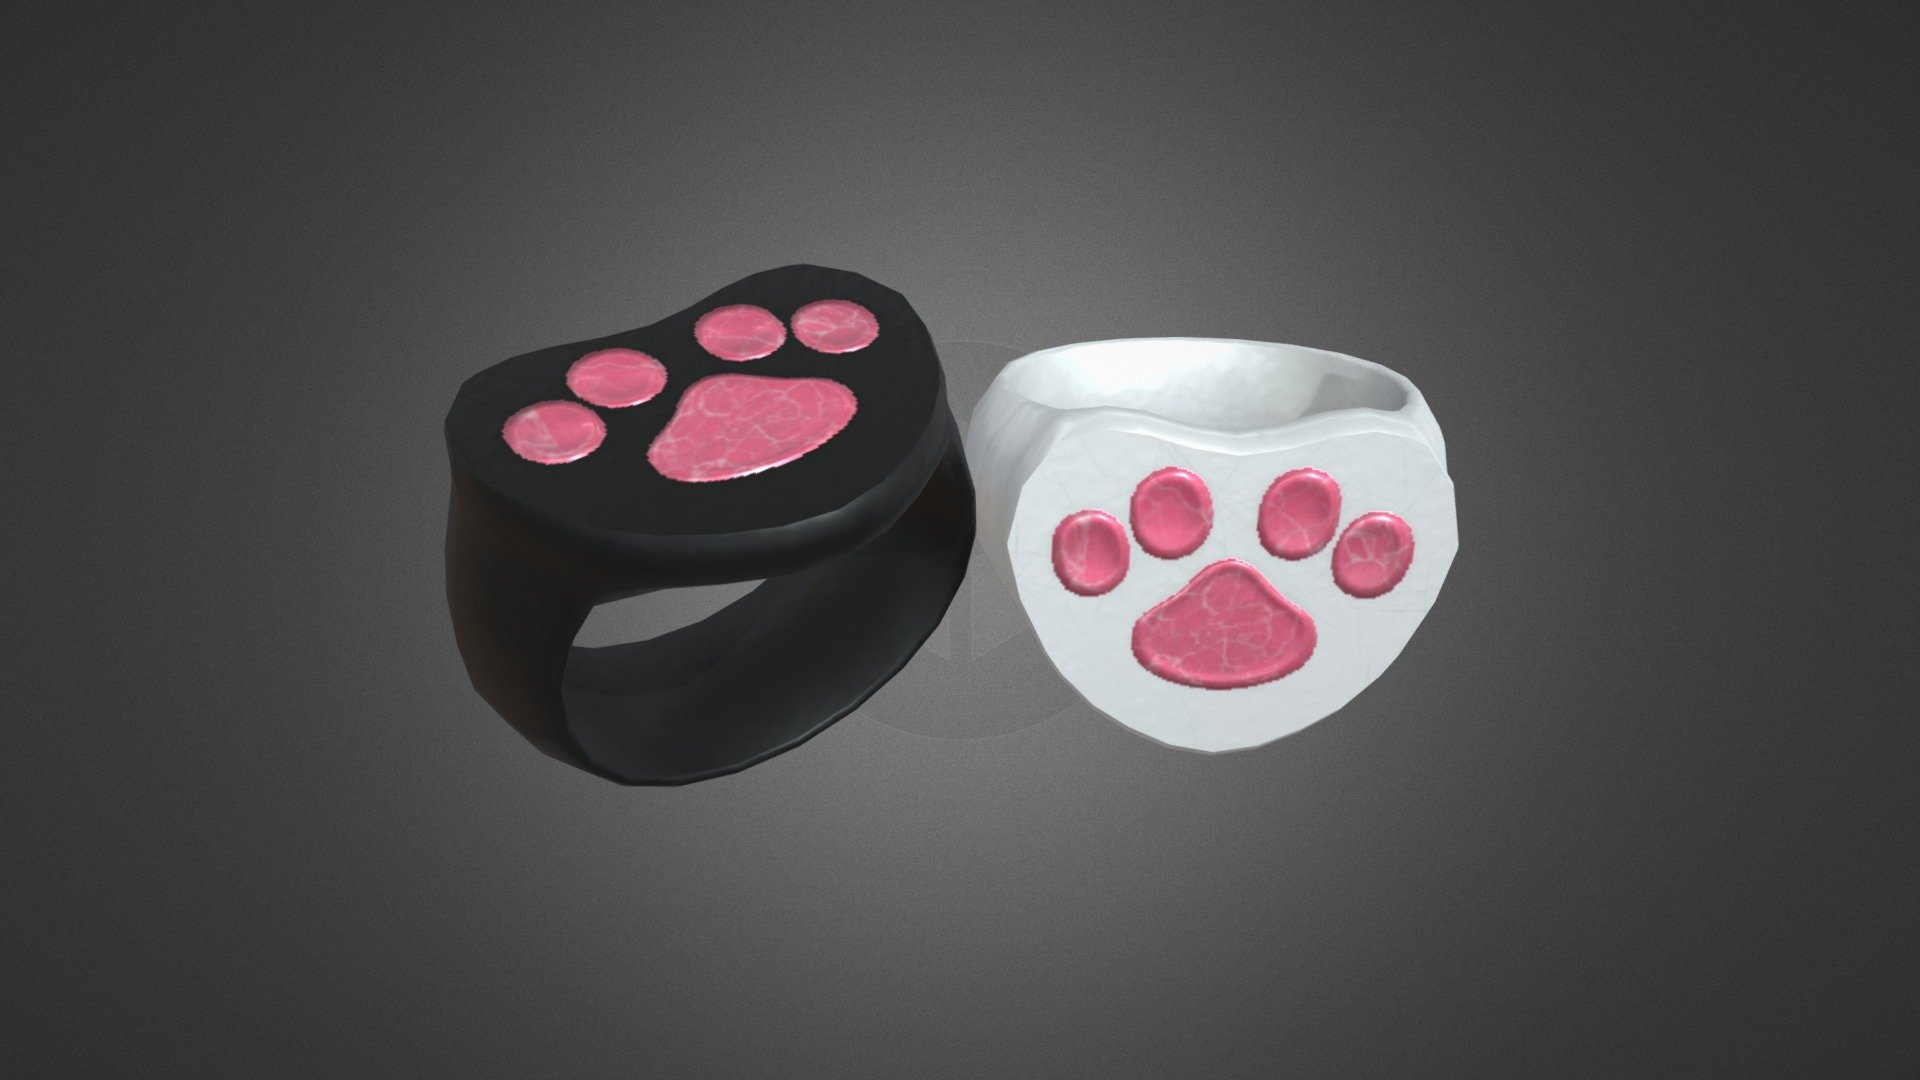 A pair of game ready cat rings. Perfect for cat enamored couples who want their very own special rings.

Each ring consists of around 600 tris. All the maps are baked in from a higher quality version I made. The original high poly ring was around 2,600 Tris. For those curious what maps these rings use. I have two diffuse maps for both the black and white version, and they all share the same Normal Map, Ambient Occlusion Map and Roughness Map. All maps have around a 256x256 pixel size, so these should be highly optimized for game use. 

For downloads for the rings, simply send me a message or a comment. I'd be more than happy to give you a copy of these lovely rings.

Ciao,
Clo7er 3d model